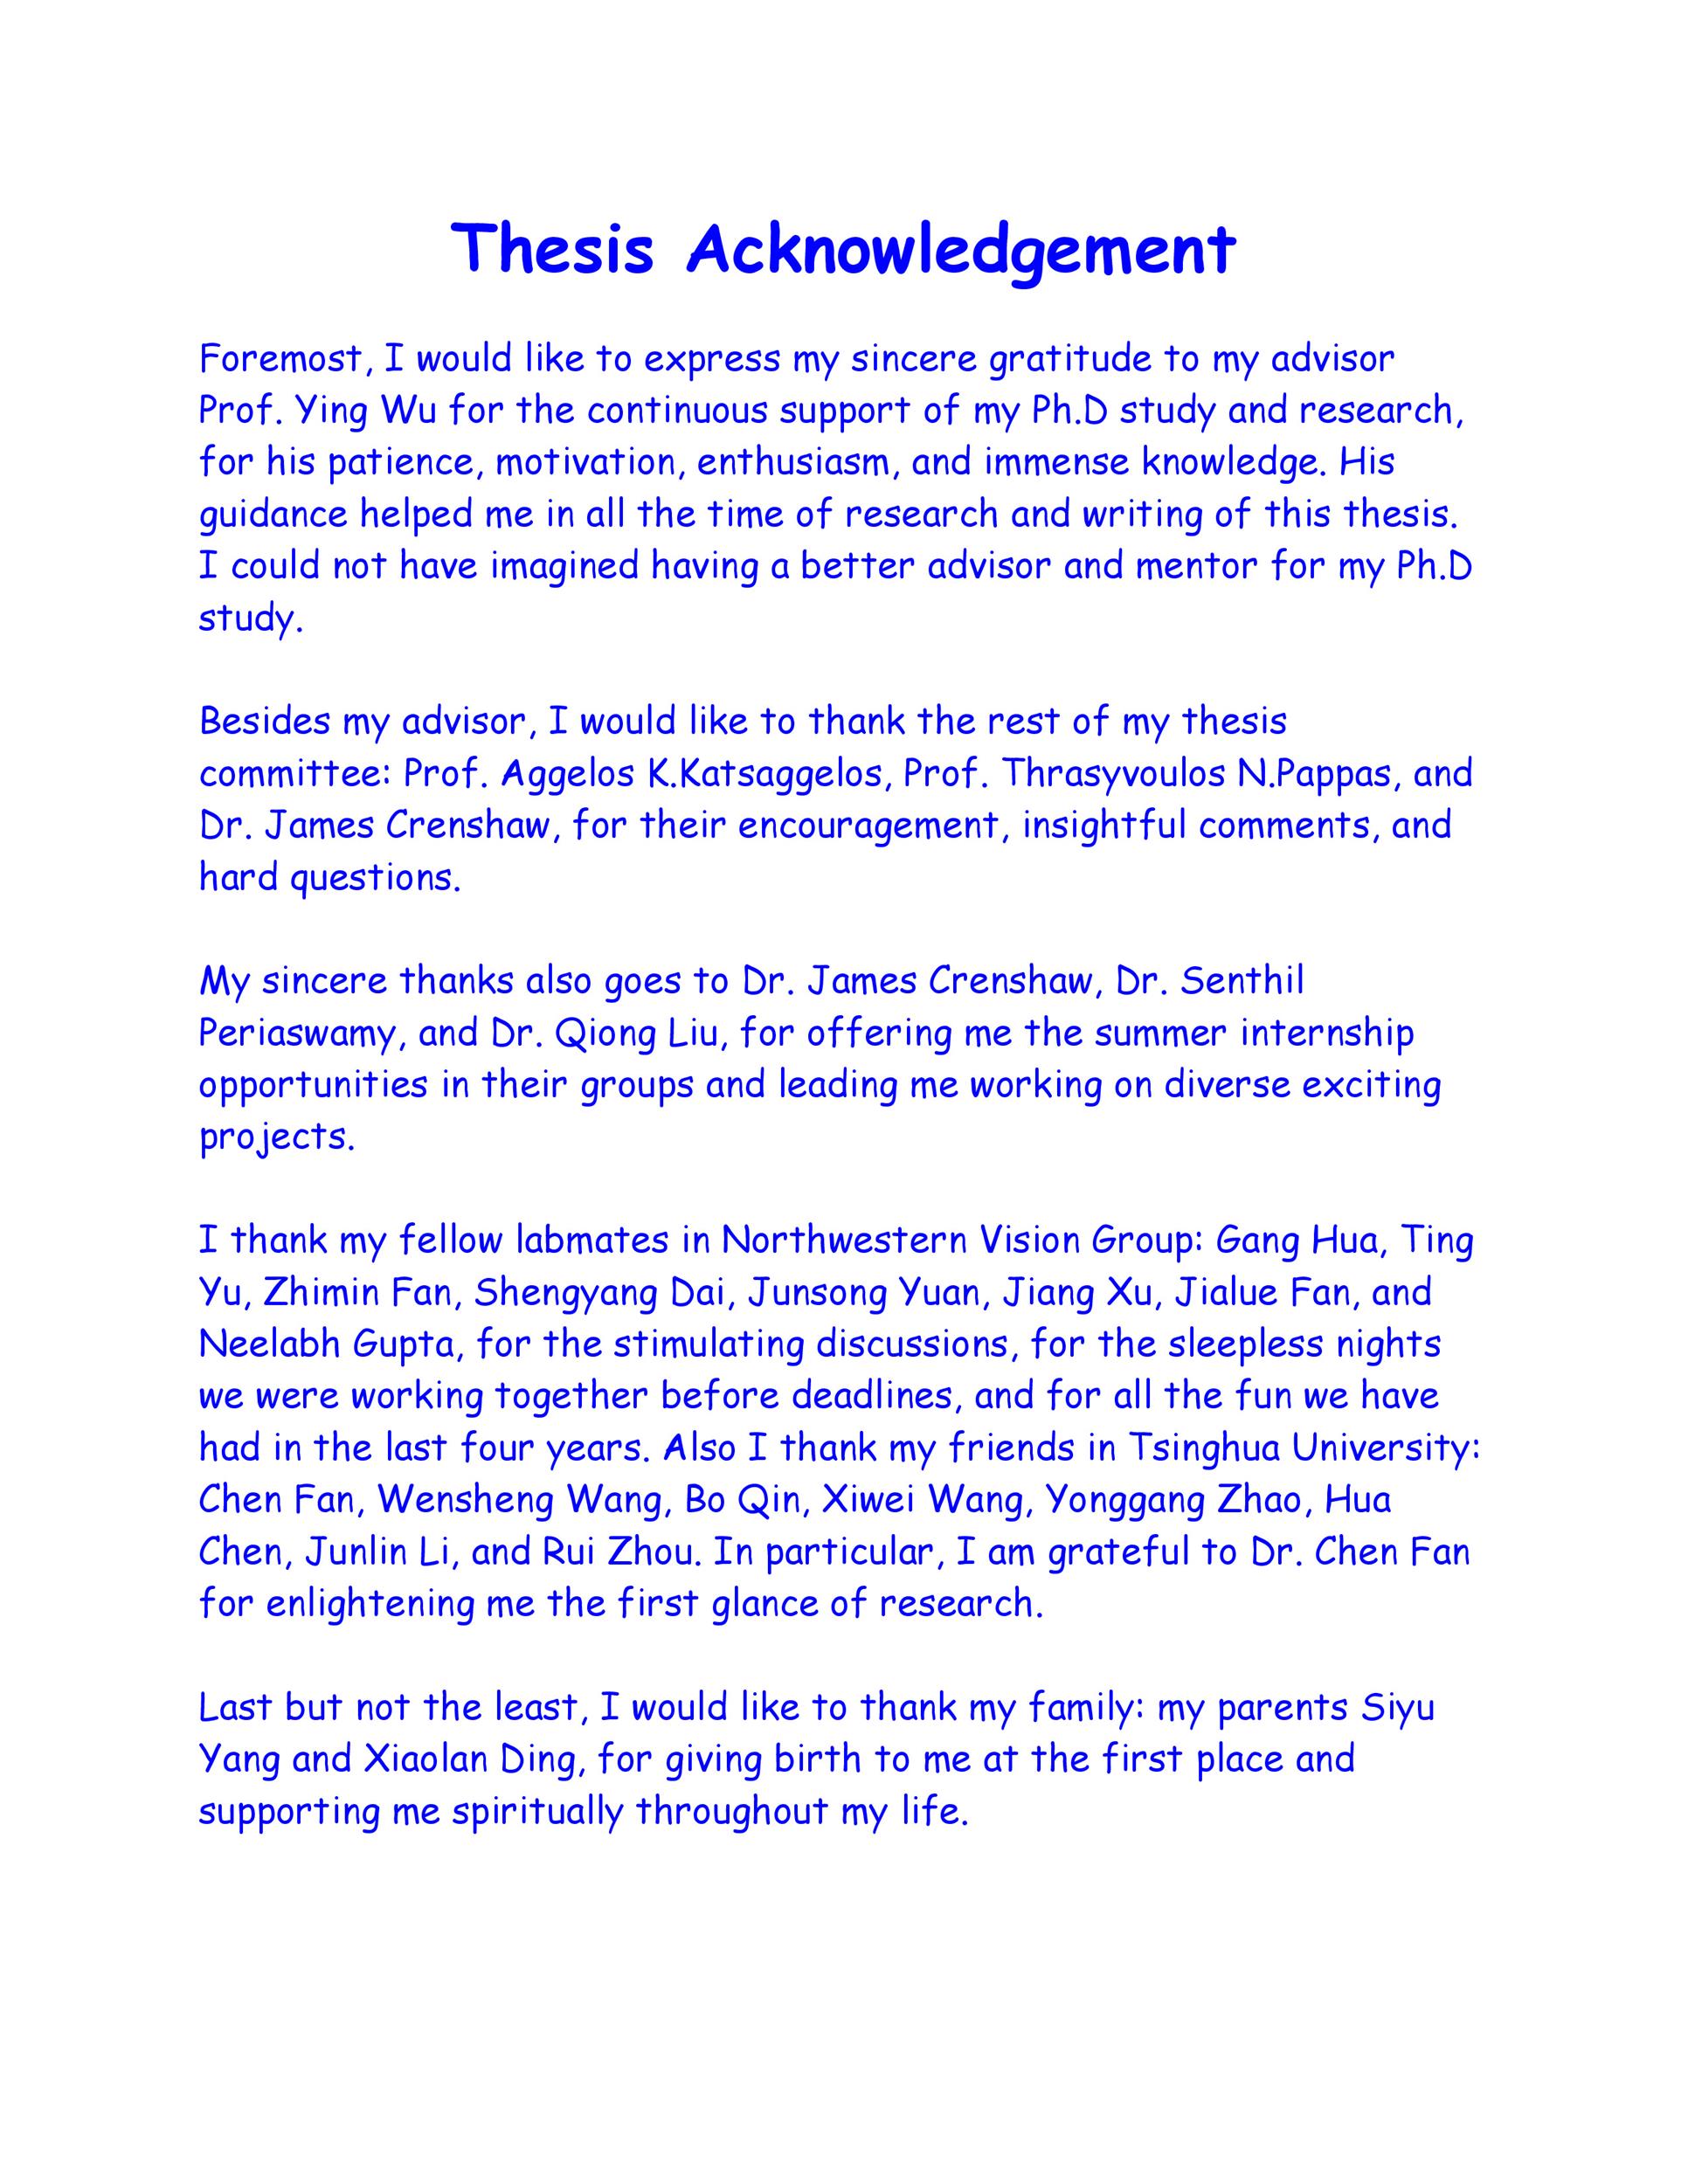 Masters dissertation services acknowledgements